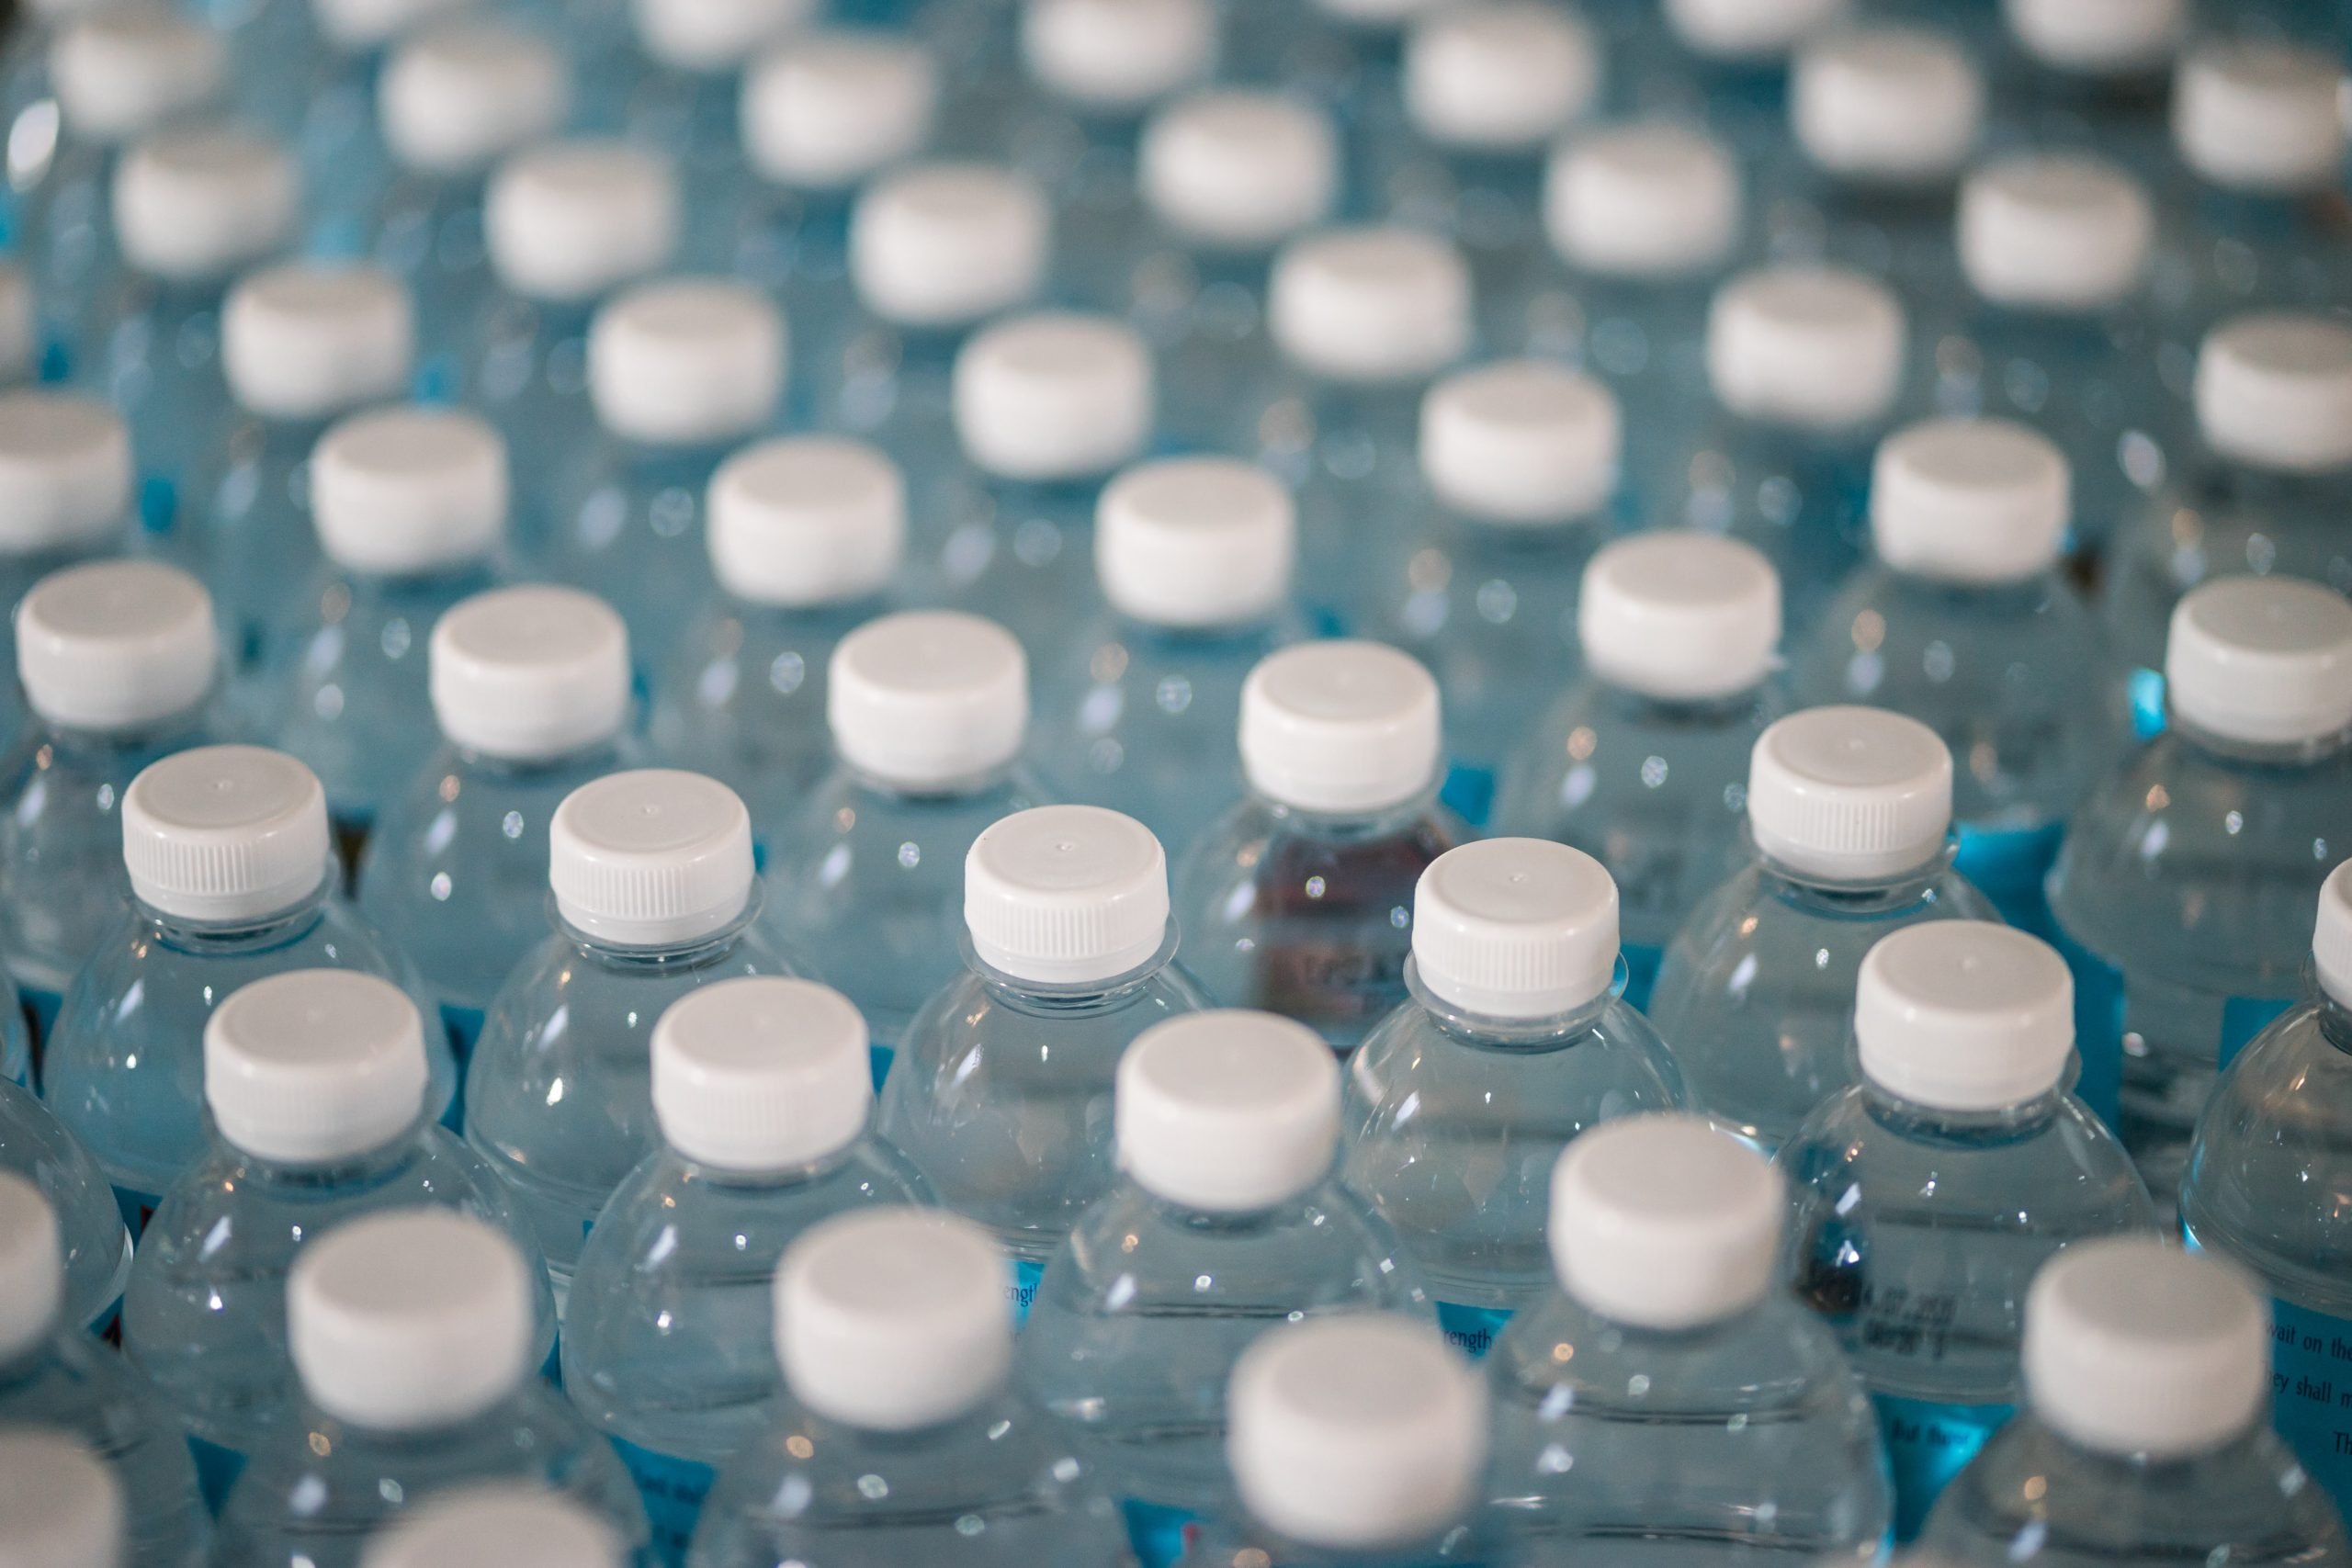 BPA-free isn't necessarily better, new study says